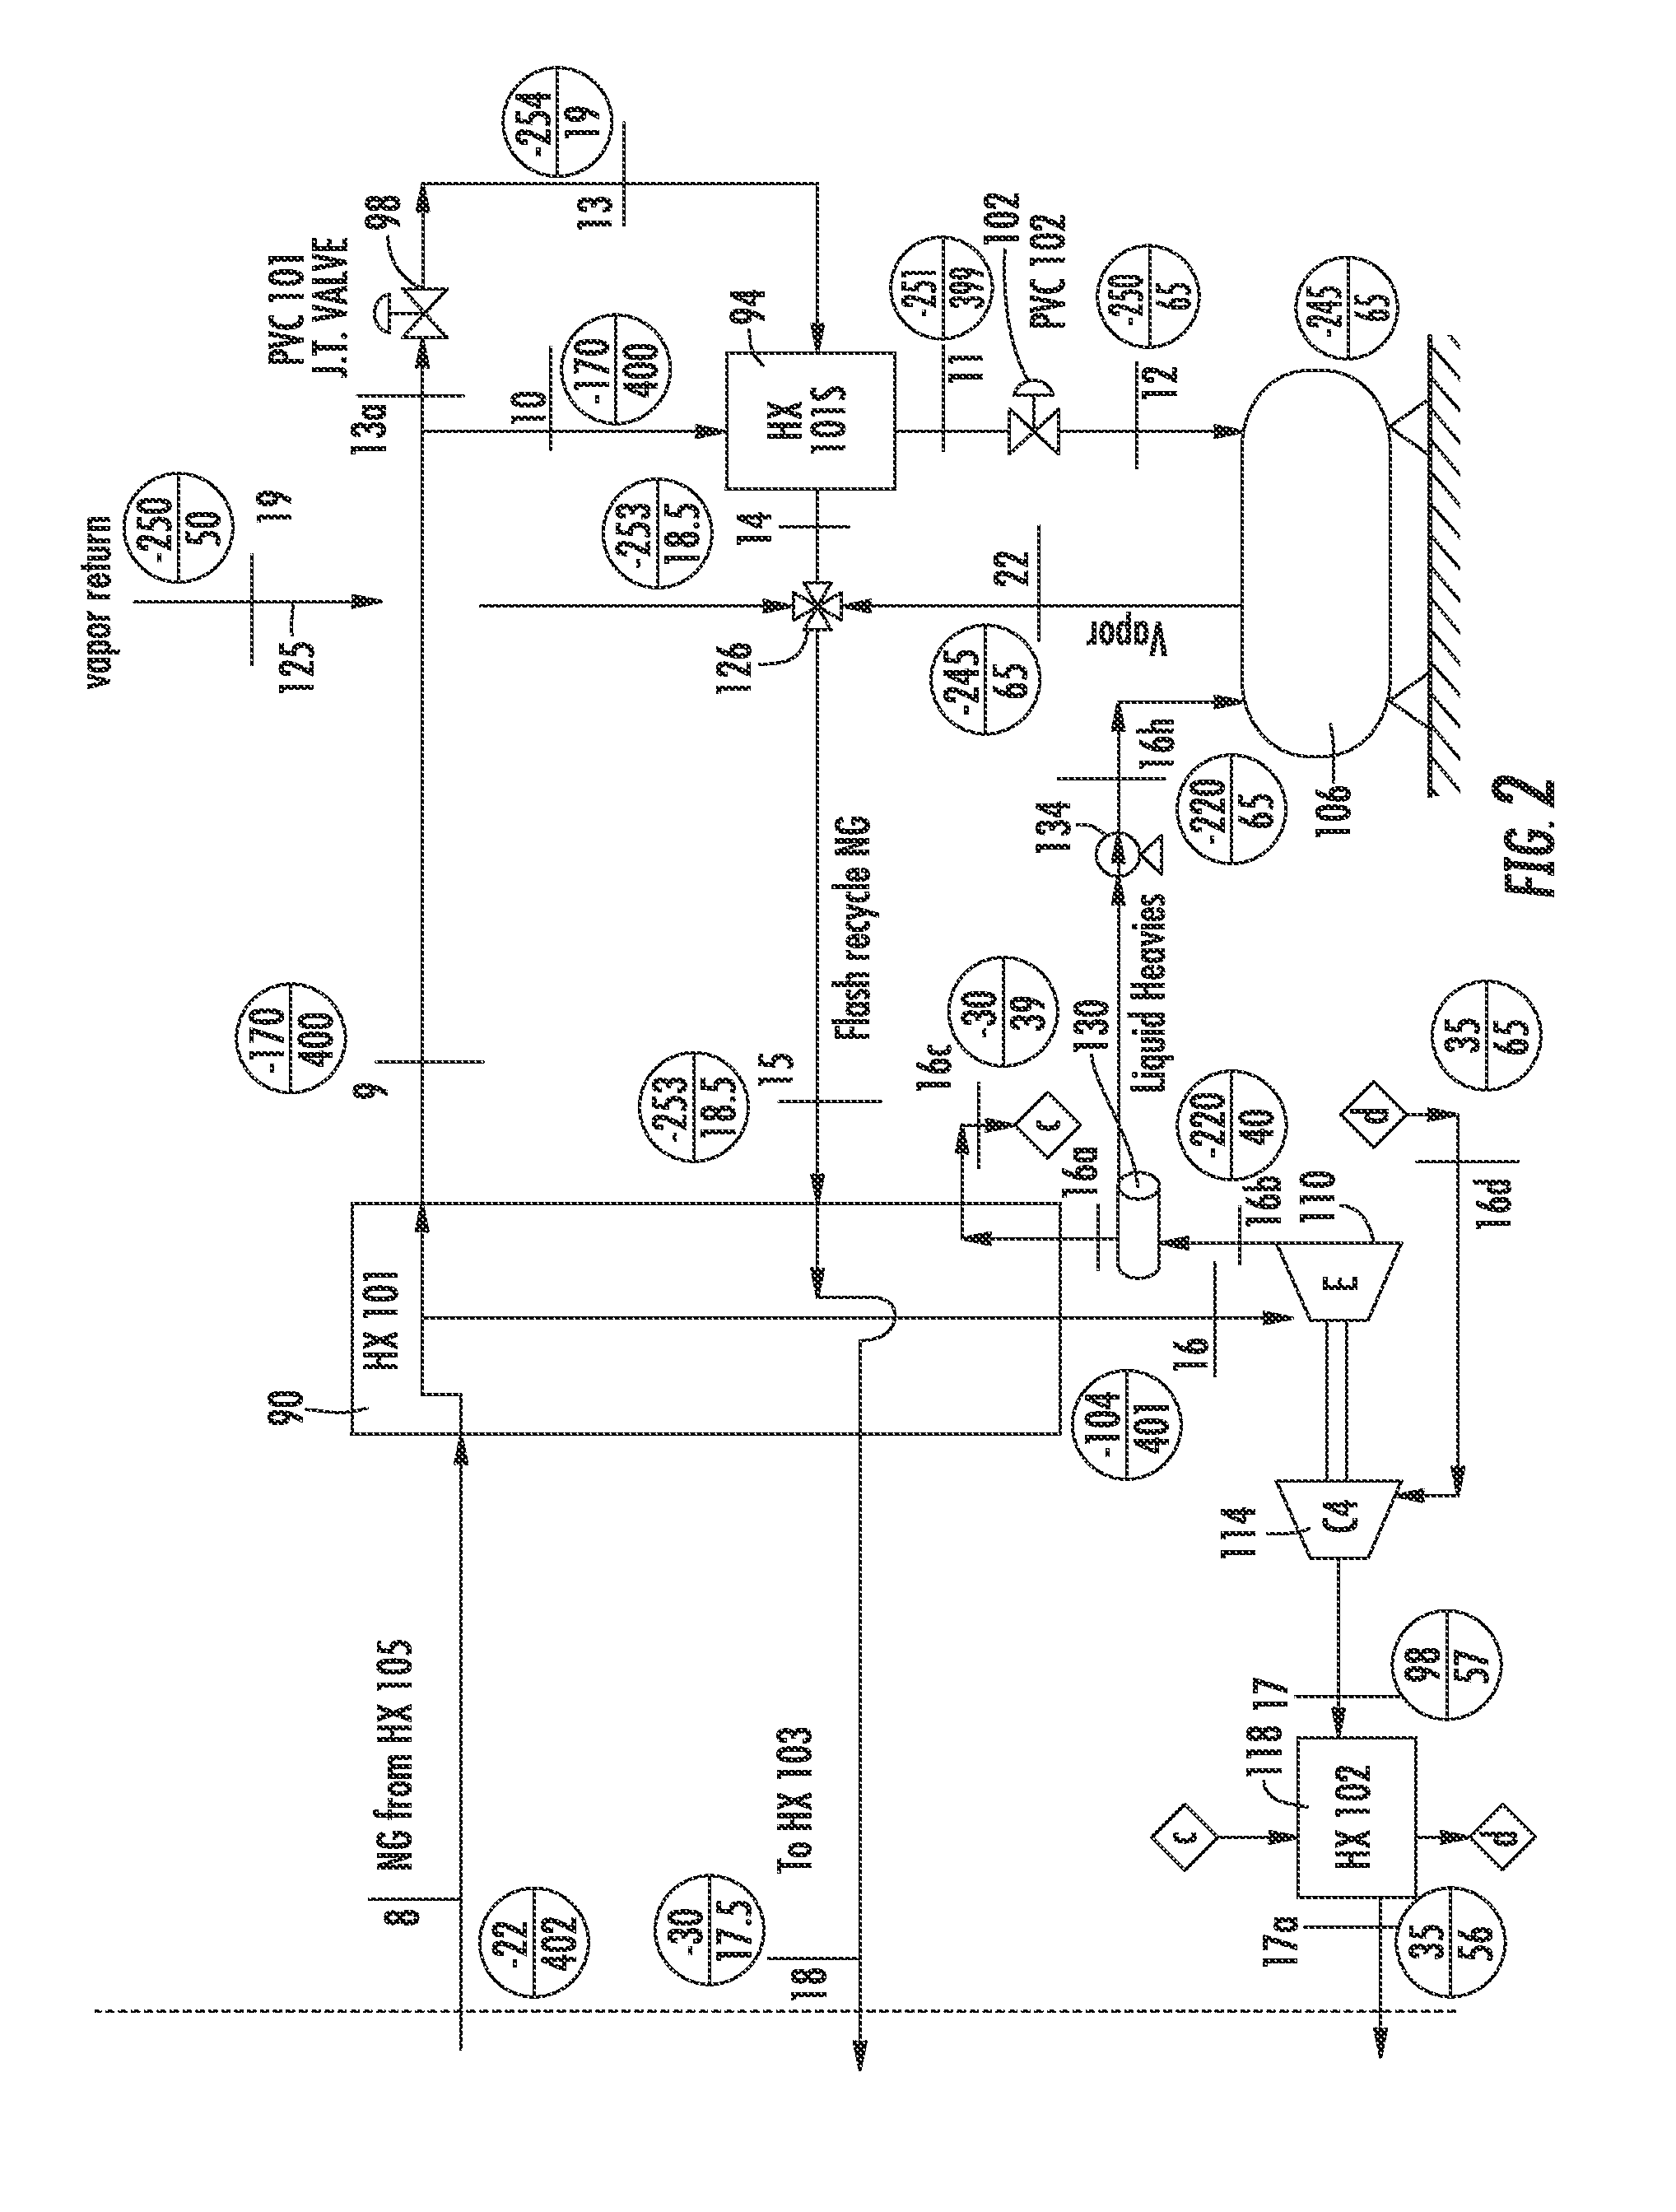 Method and system for the small-scale production of liquified natural gas (LNG) and cold compressed gas (CCNG) from low-pressure natural gas